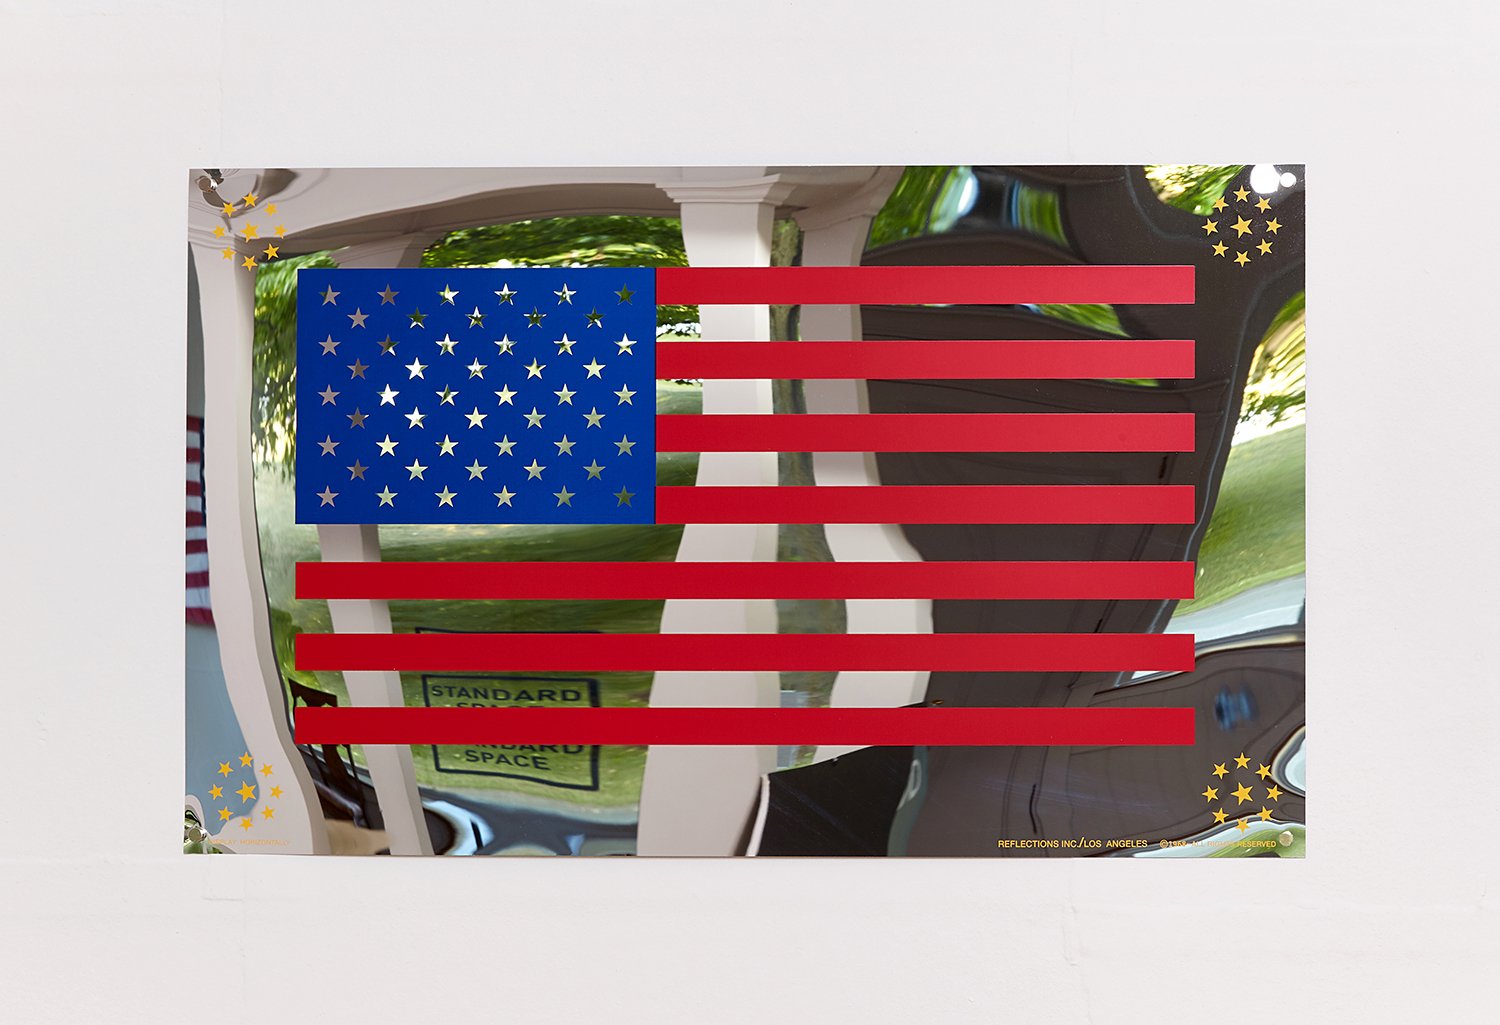   Rec-elections (This is America),  2020 silkscreen on mirrored mylar 15 x 24.5 inches Installation view, Standard Space Gallery, Sharon, CT 